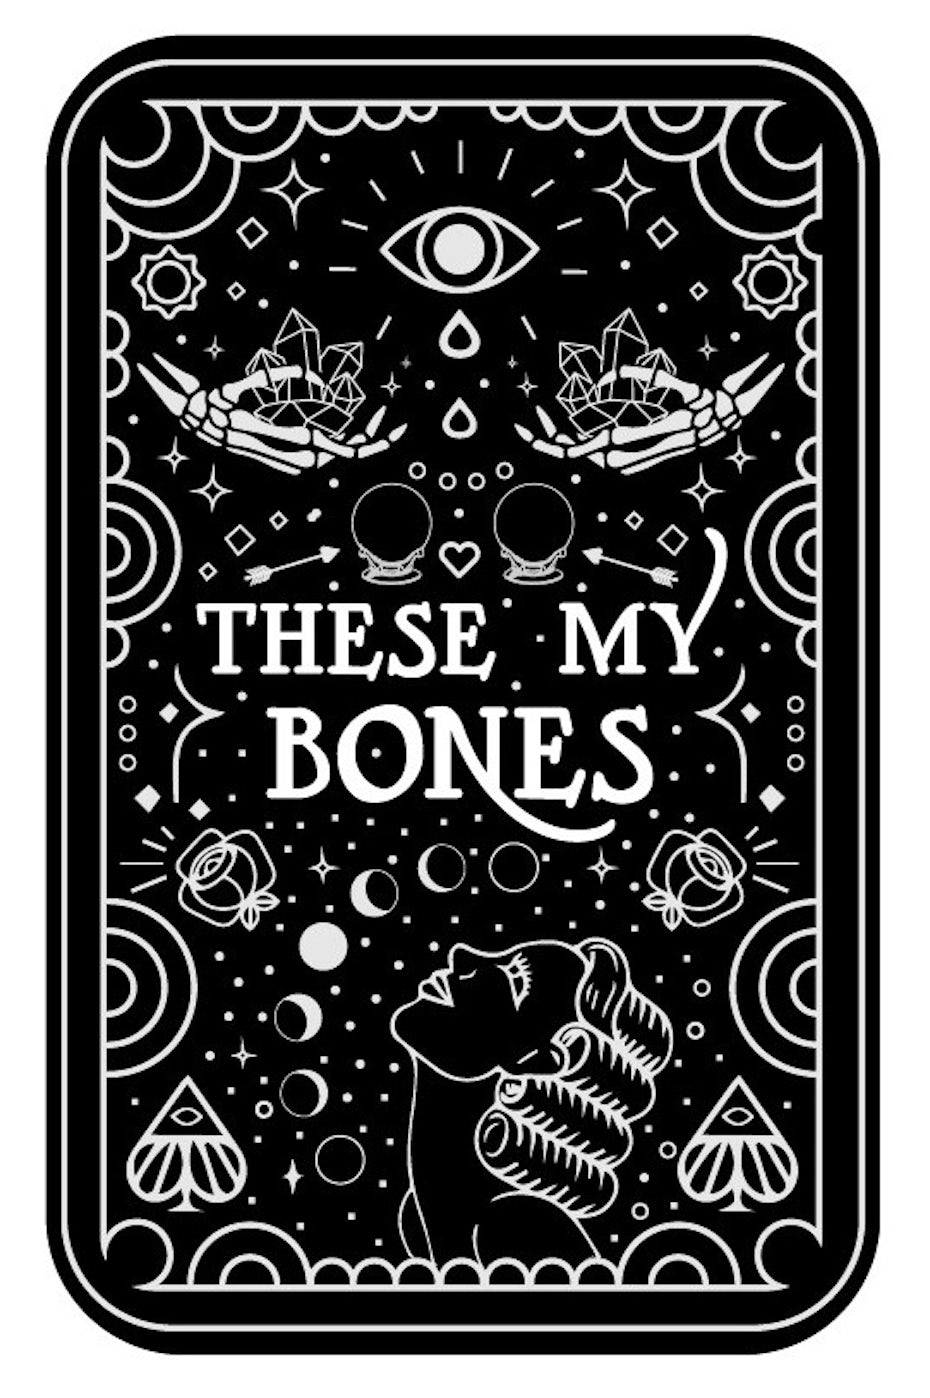 Black tarot card depicting a variety of mystic things in white geometric shapes